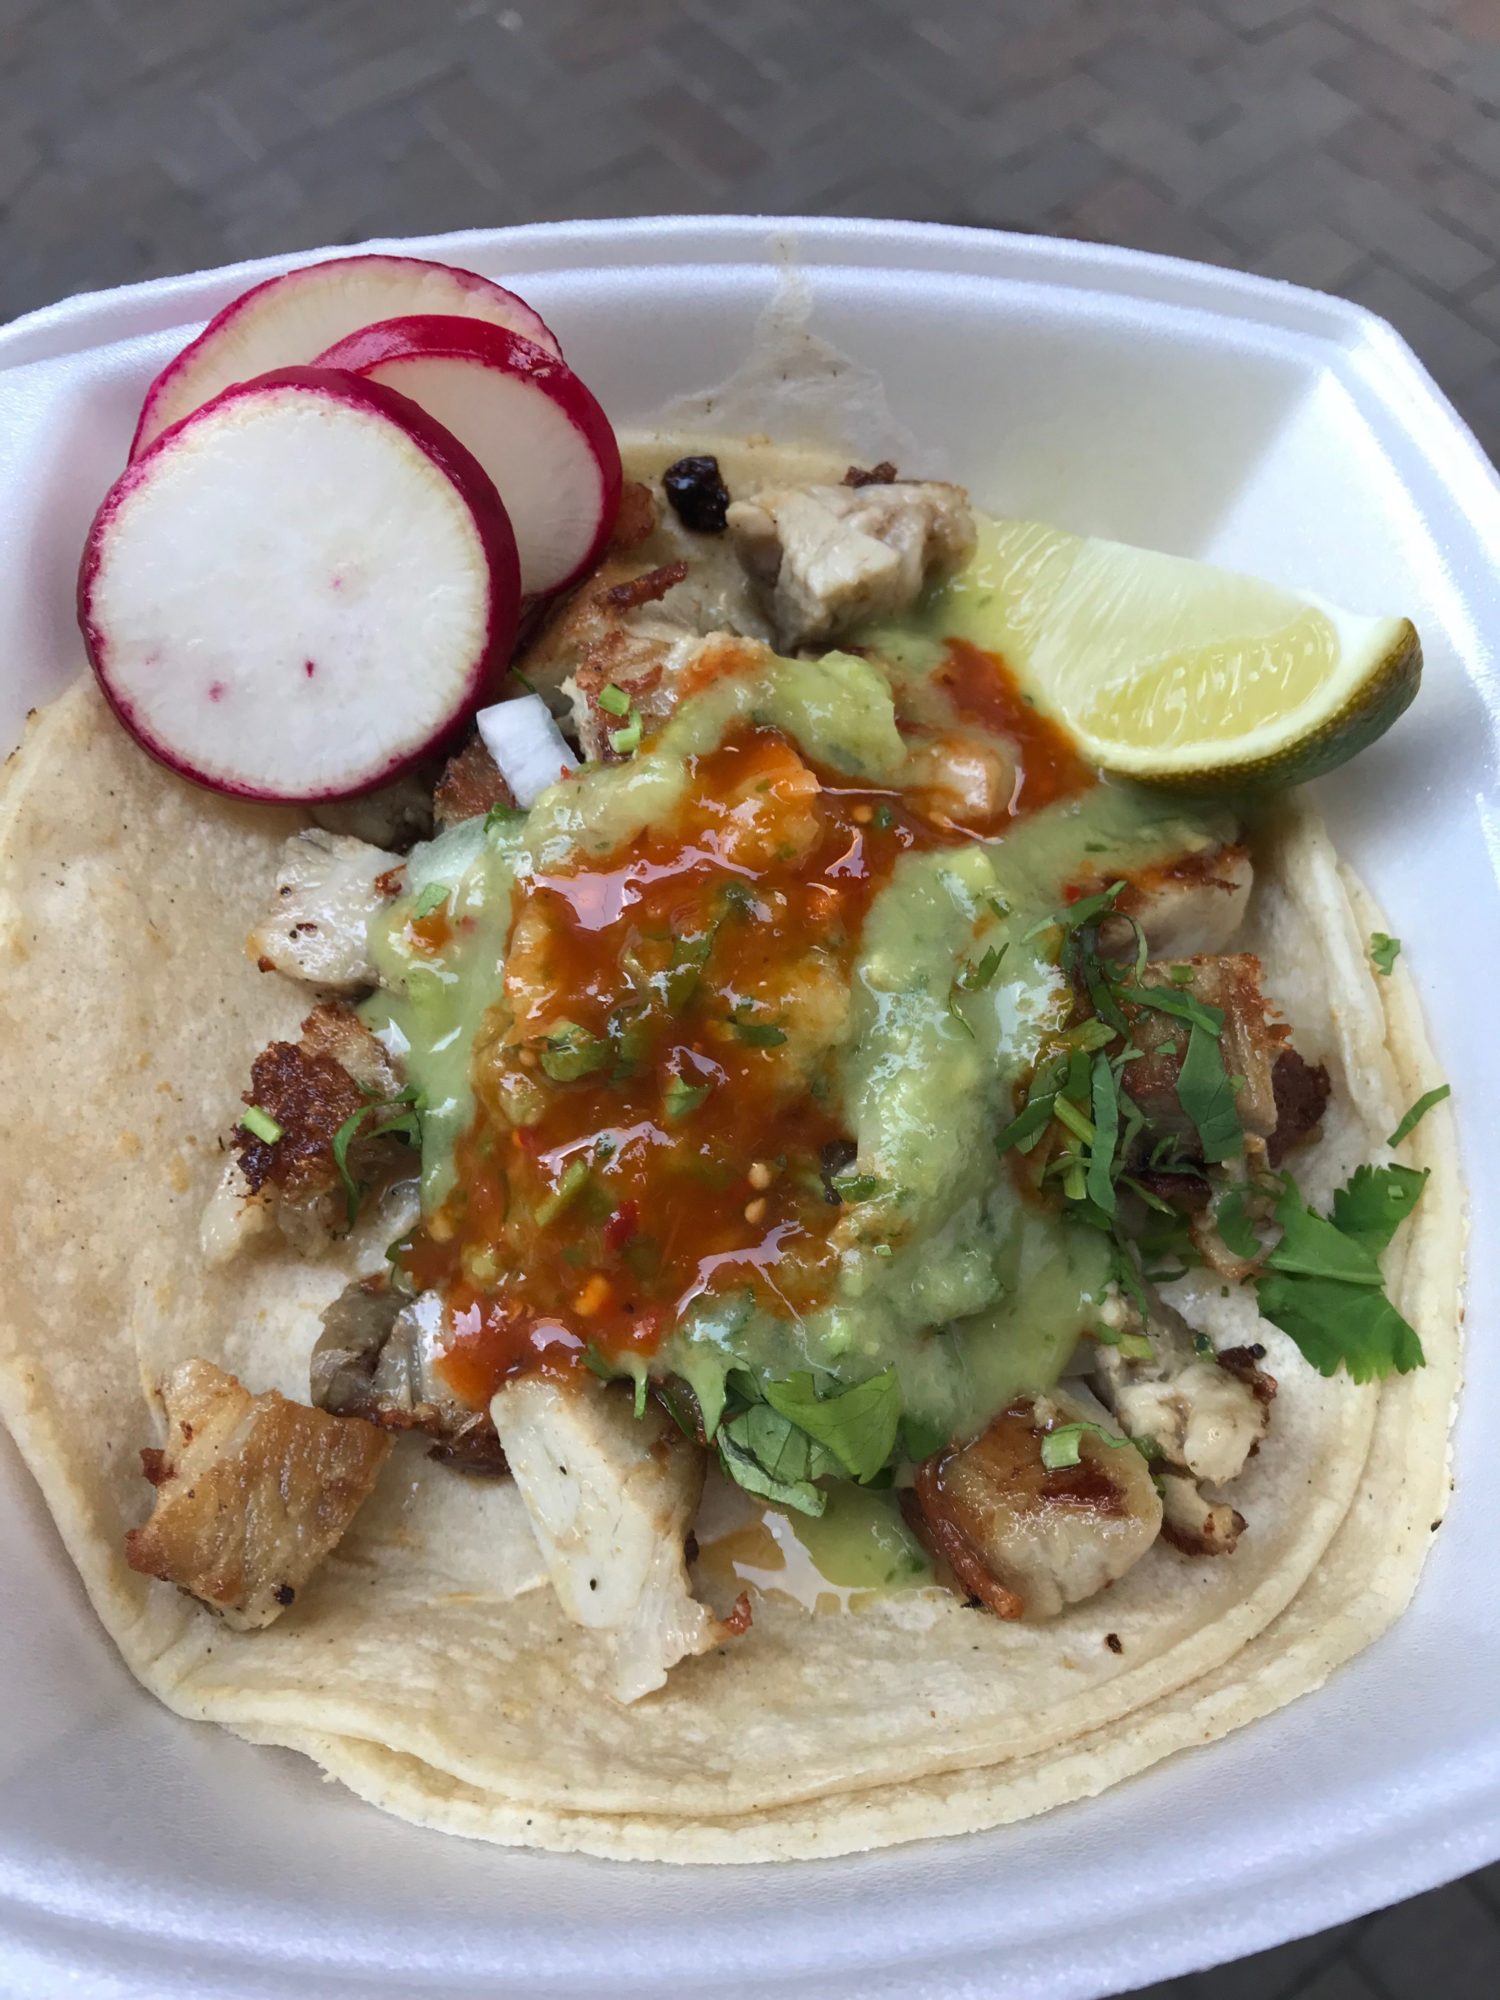 A chicken taco with red and green sauce, cilantro, radishes, and a lime in a styrofoam container